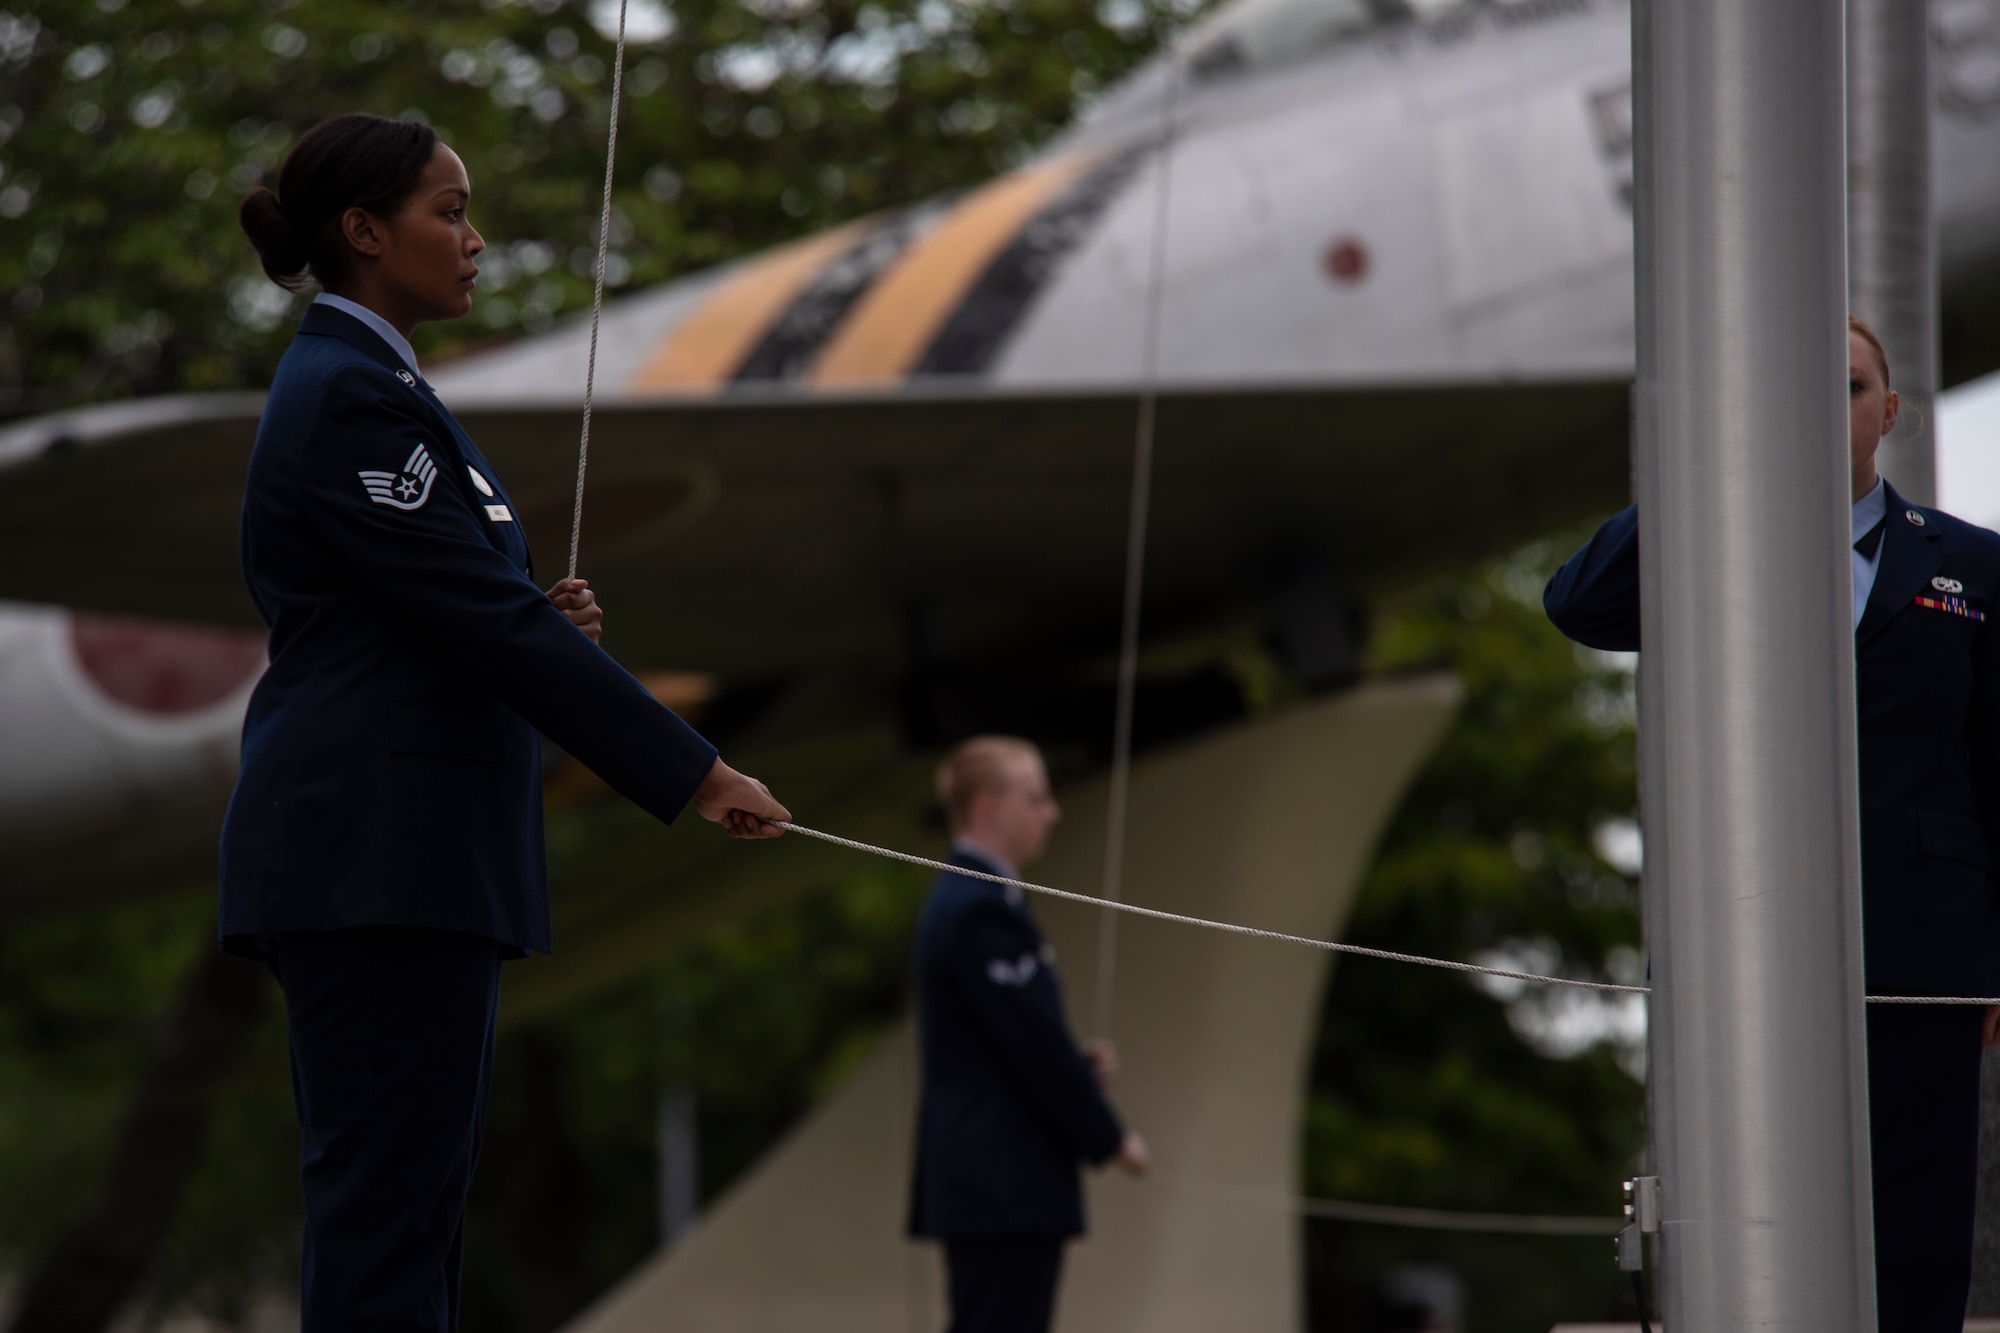 U.S. Air Force Staff Sgt. Jalessa Randle, the 35th Force Support Squadron commander executive assistant, lowers the American flag during a Memorial Day ceremony at Misawa Air Base, Japan, May 25, 2018. Six Airmen with the 35th Fighter Wing served as ceremonial caretakers of the U.S. and Japan flags during the ceremony. (U.S. Air Force photo by Airman 1st Class Collette Brooks)